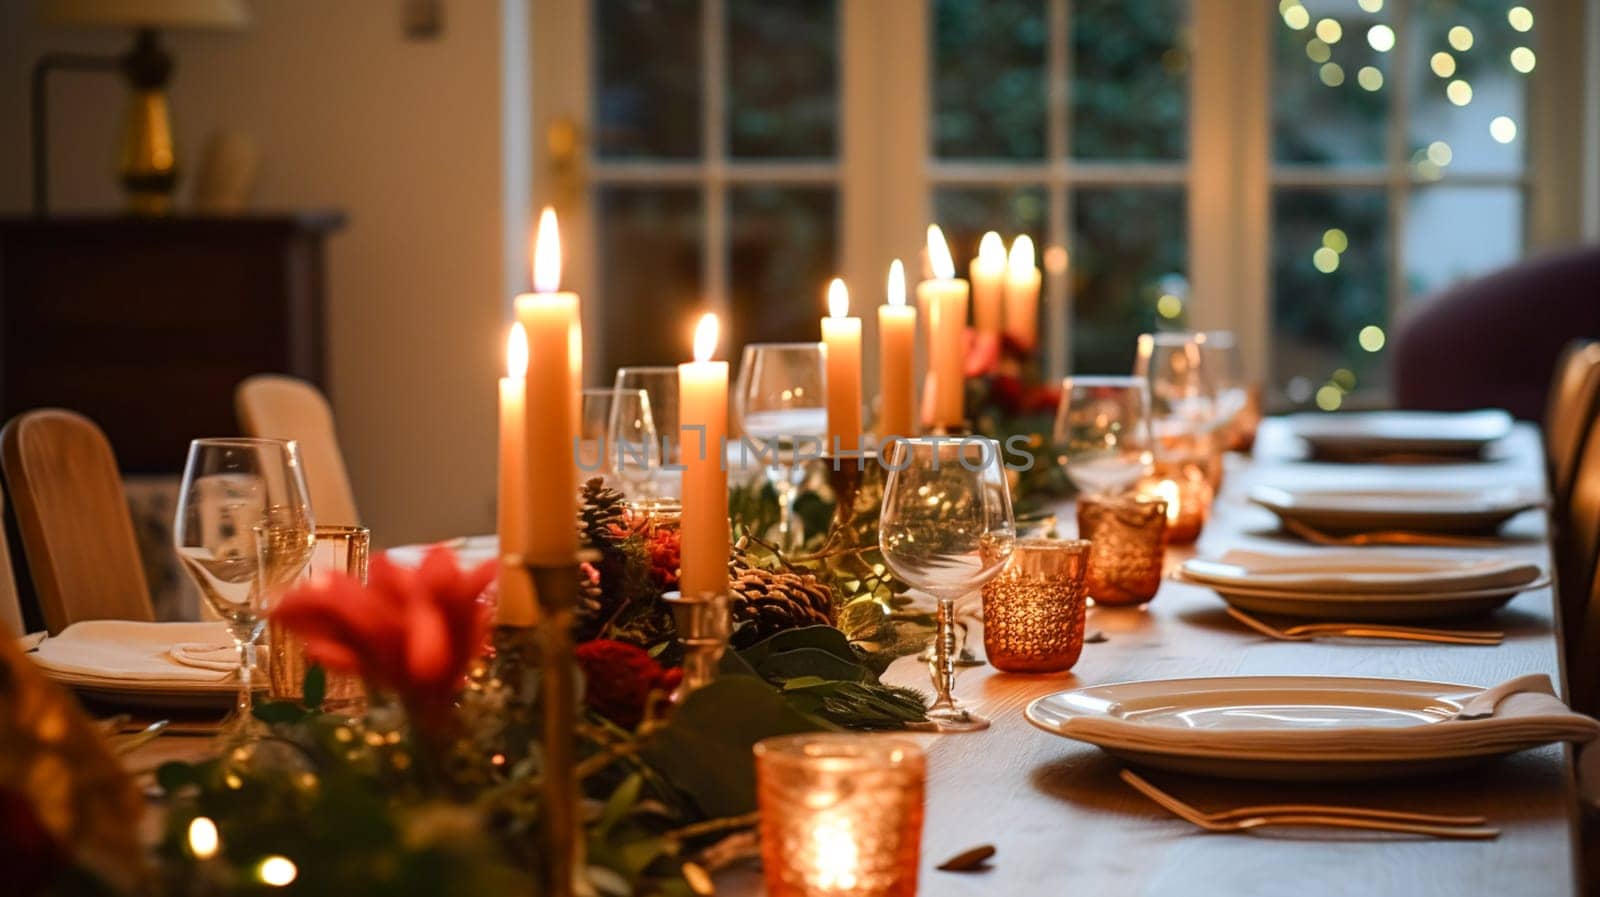 Table decor, holiday tablescape and formal dinner table setting for Christmas, holidays and event celebration, English country decoration and home styling inspiration